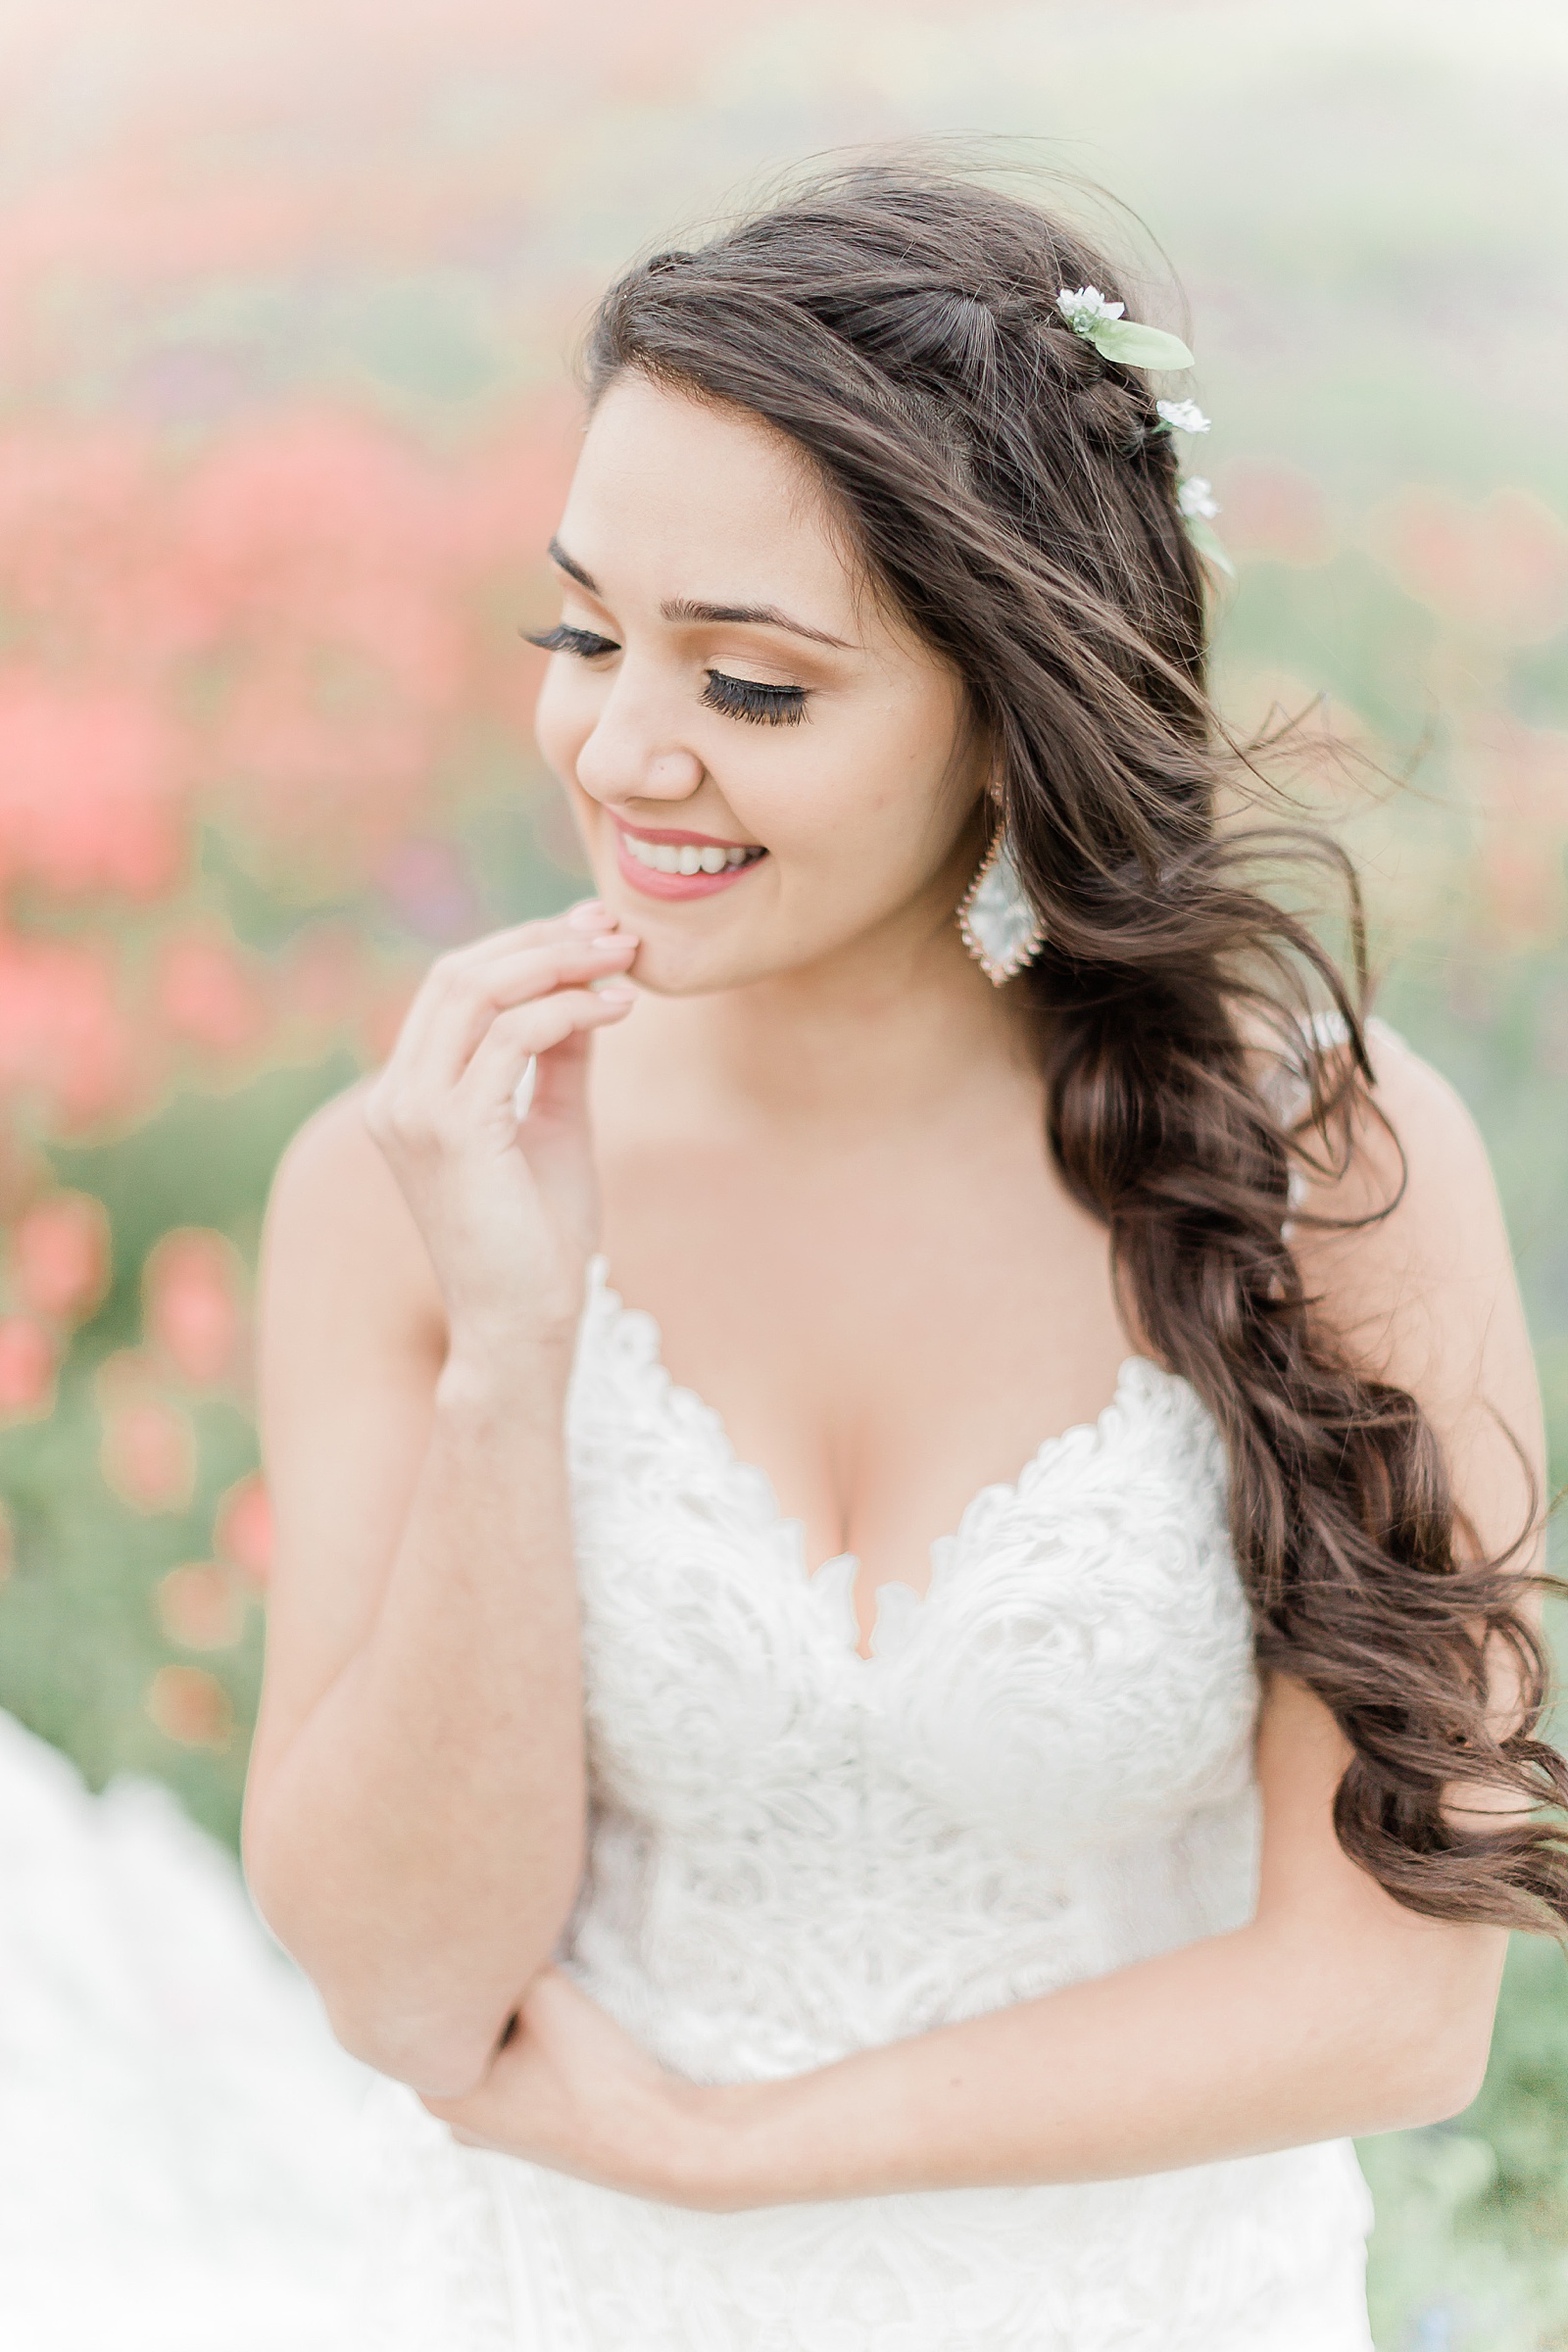 Romantic Flower Bridal Session with Lace Gown by Anna Kay Photography, Destination Wedding Photographer